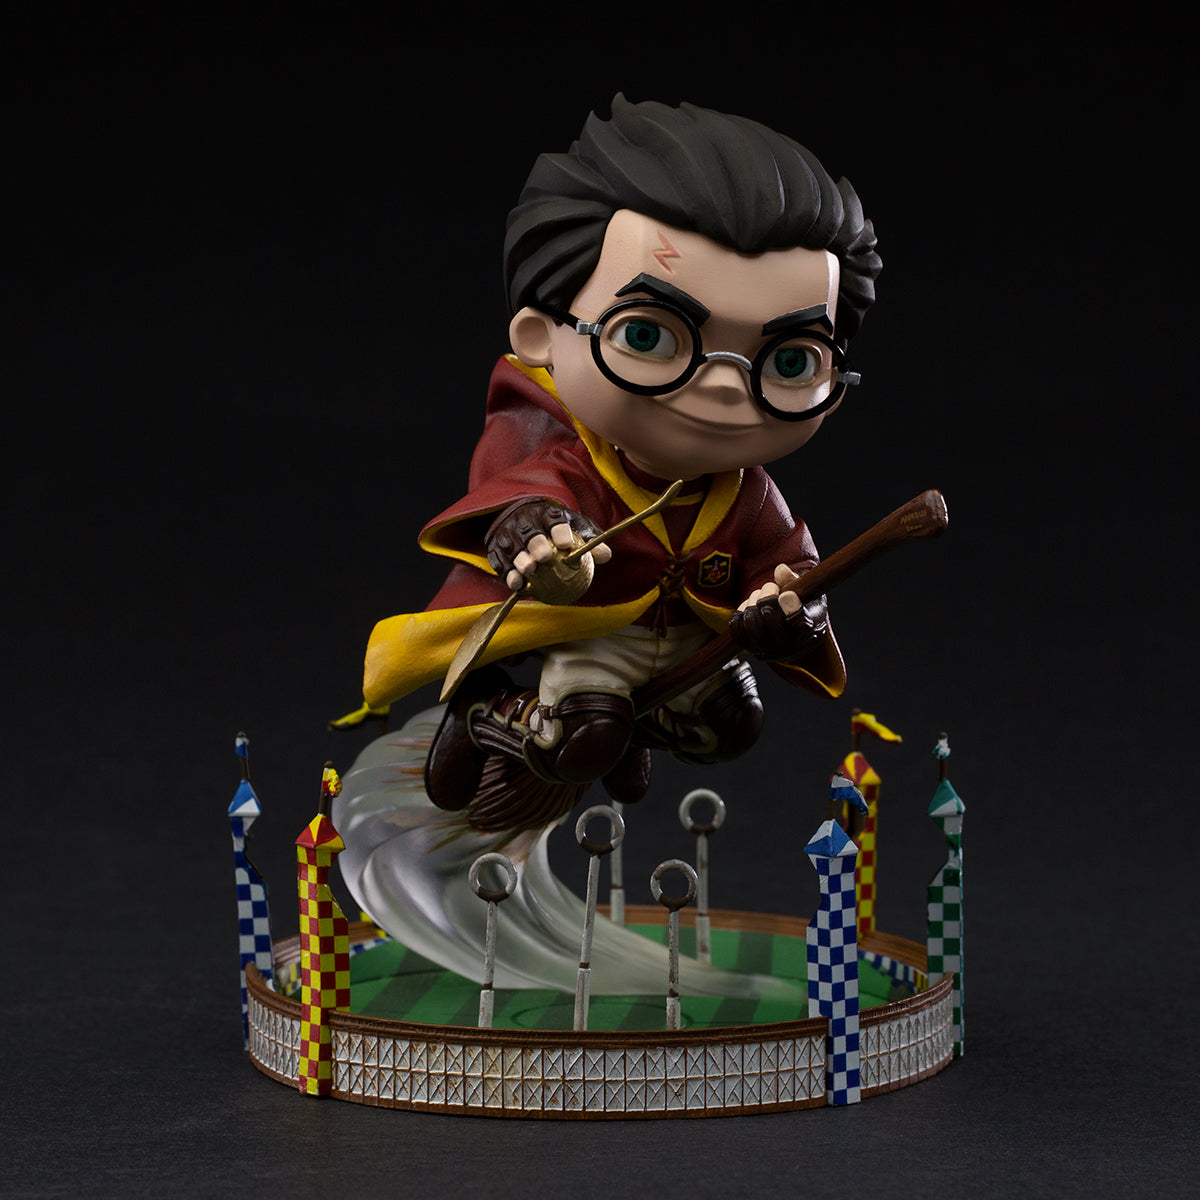 Harry Potter at the Quidditch Match MiniCo Figure by Iron Studios -MiniCo - India - www.superherotoystore.com